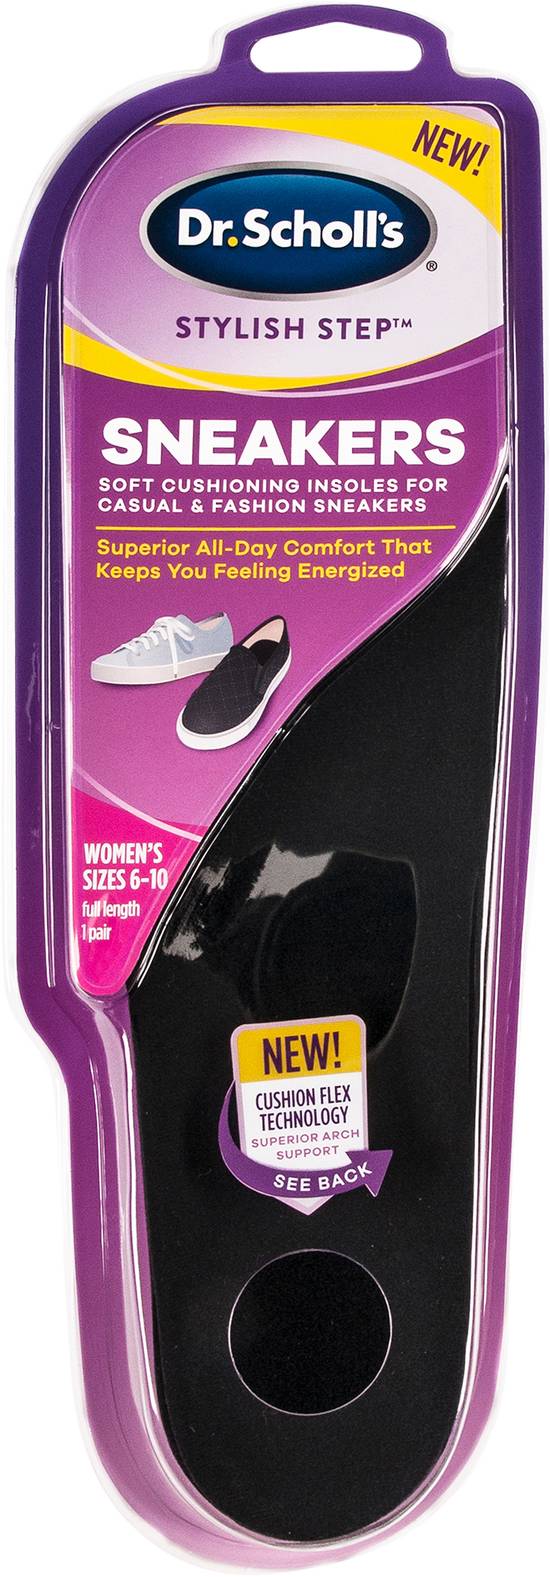 Dr. Scholl's Women's Sizes 6-10 Sneakers Insoles (1 pair)